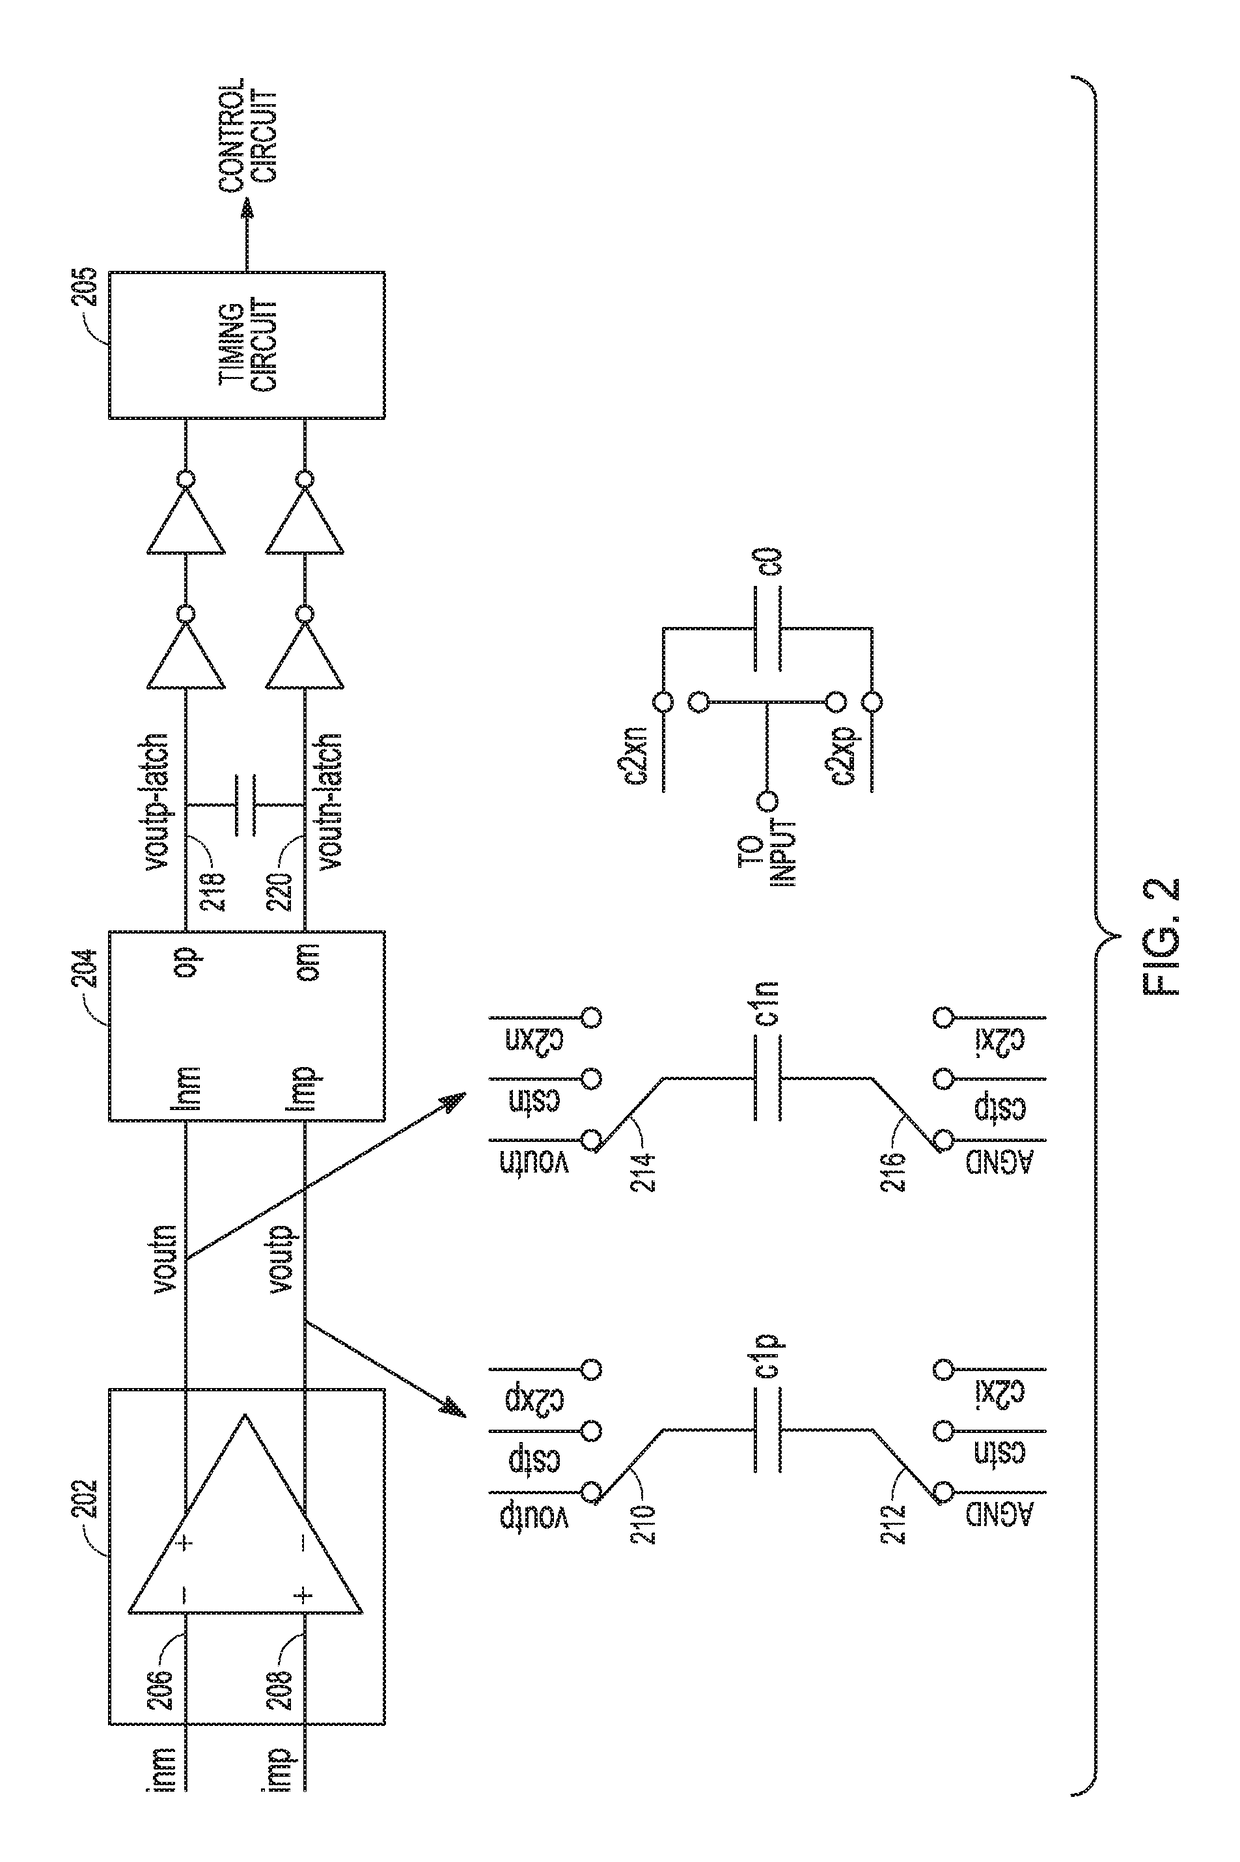 Analog-to-digital converter reusing comparator for residue amplifier for noise shaping